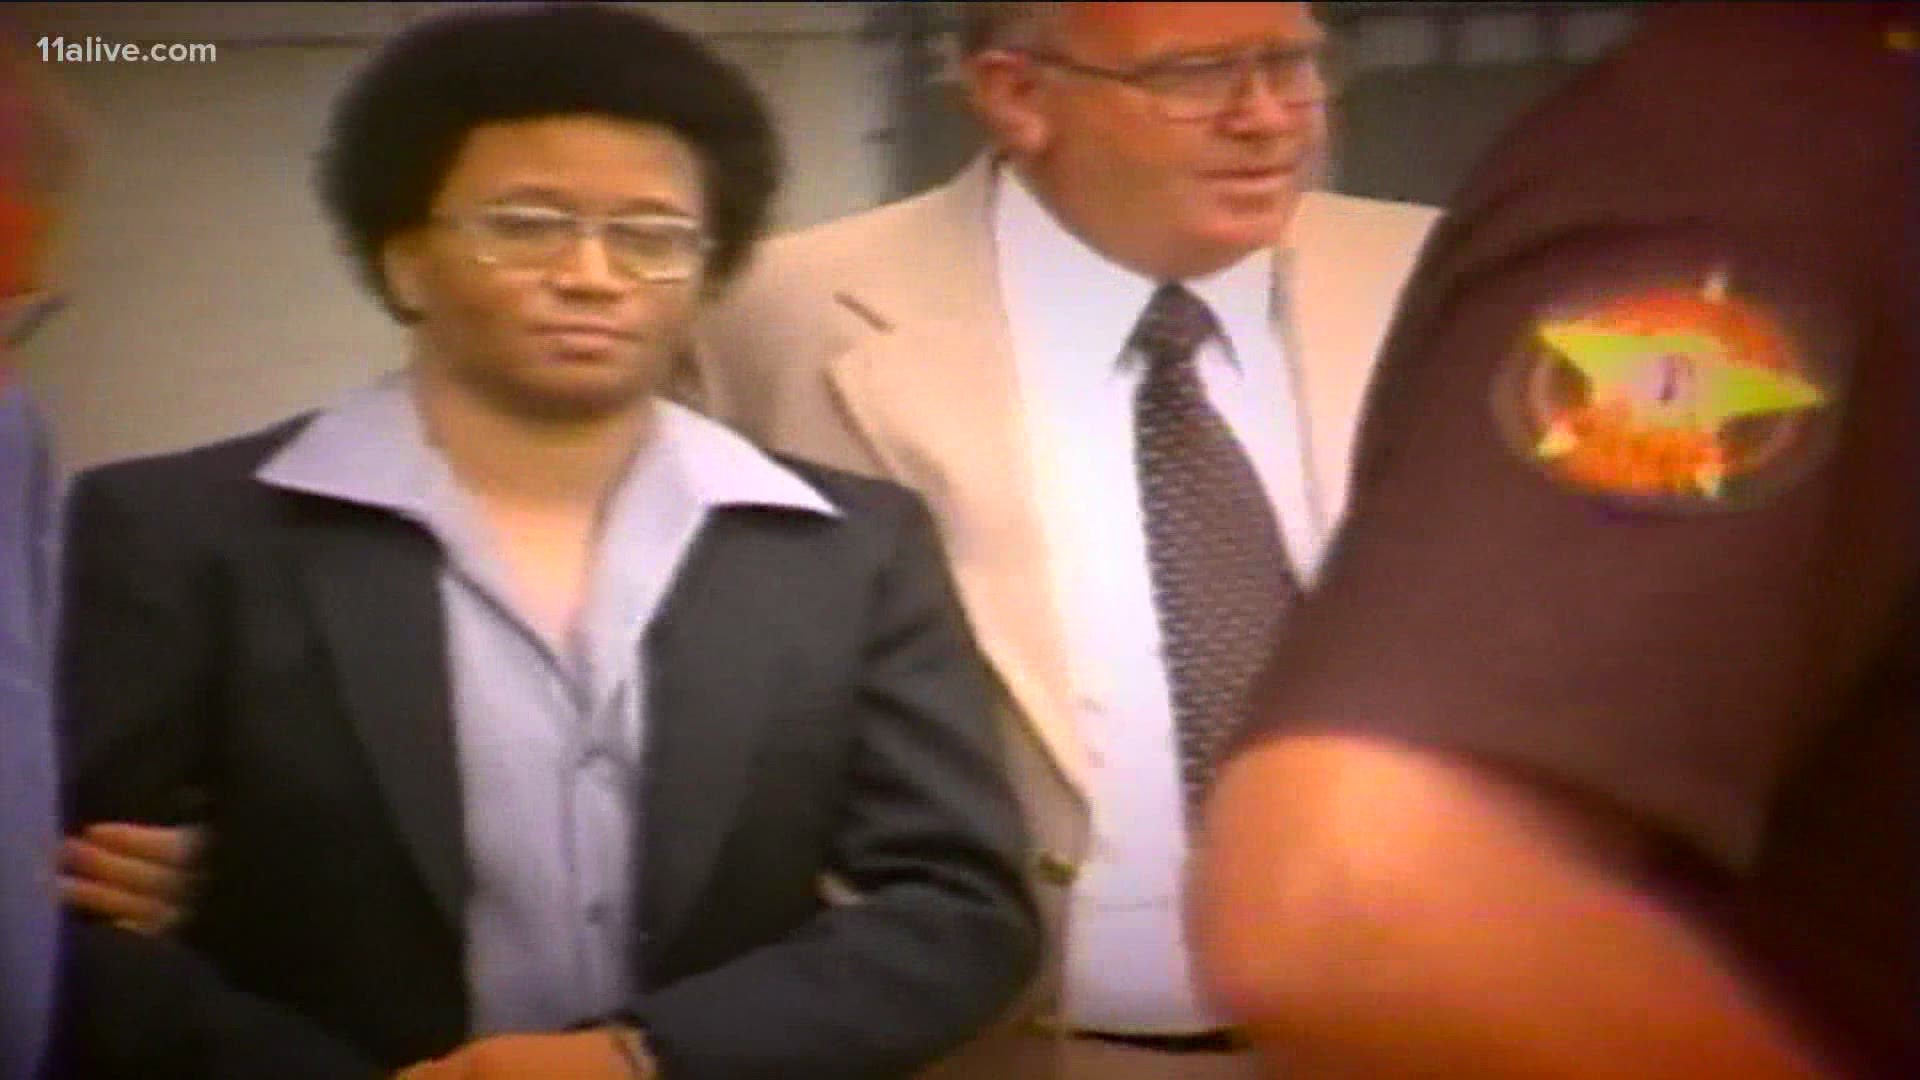 It's been 40 years since the longtime suspected killer, Wayne Williams was arrested in two adults' unrelated deaths.